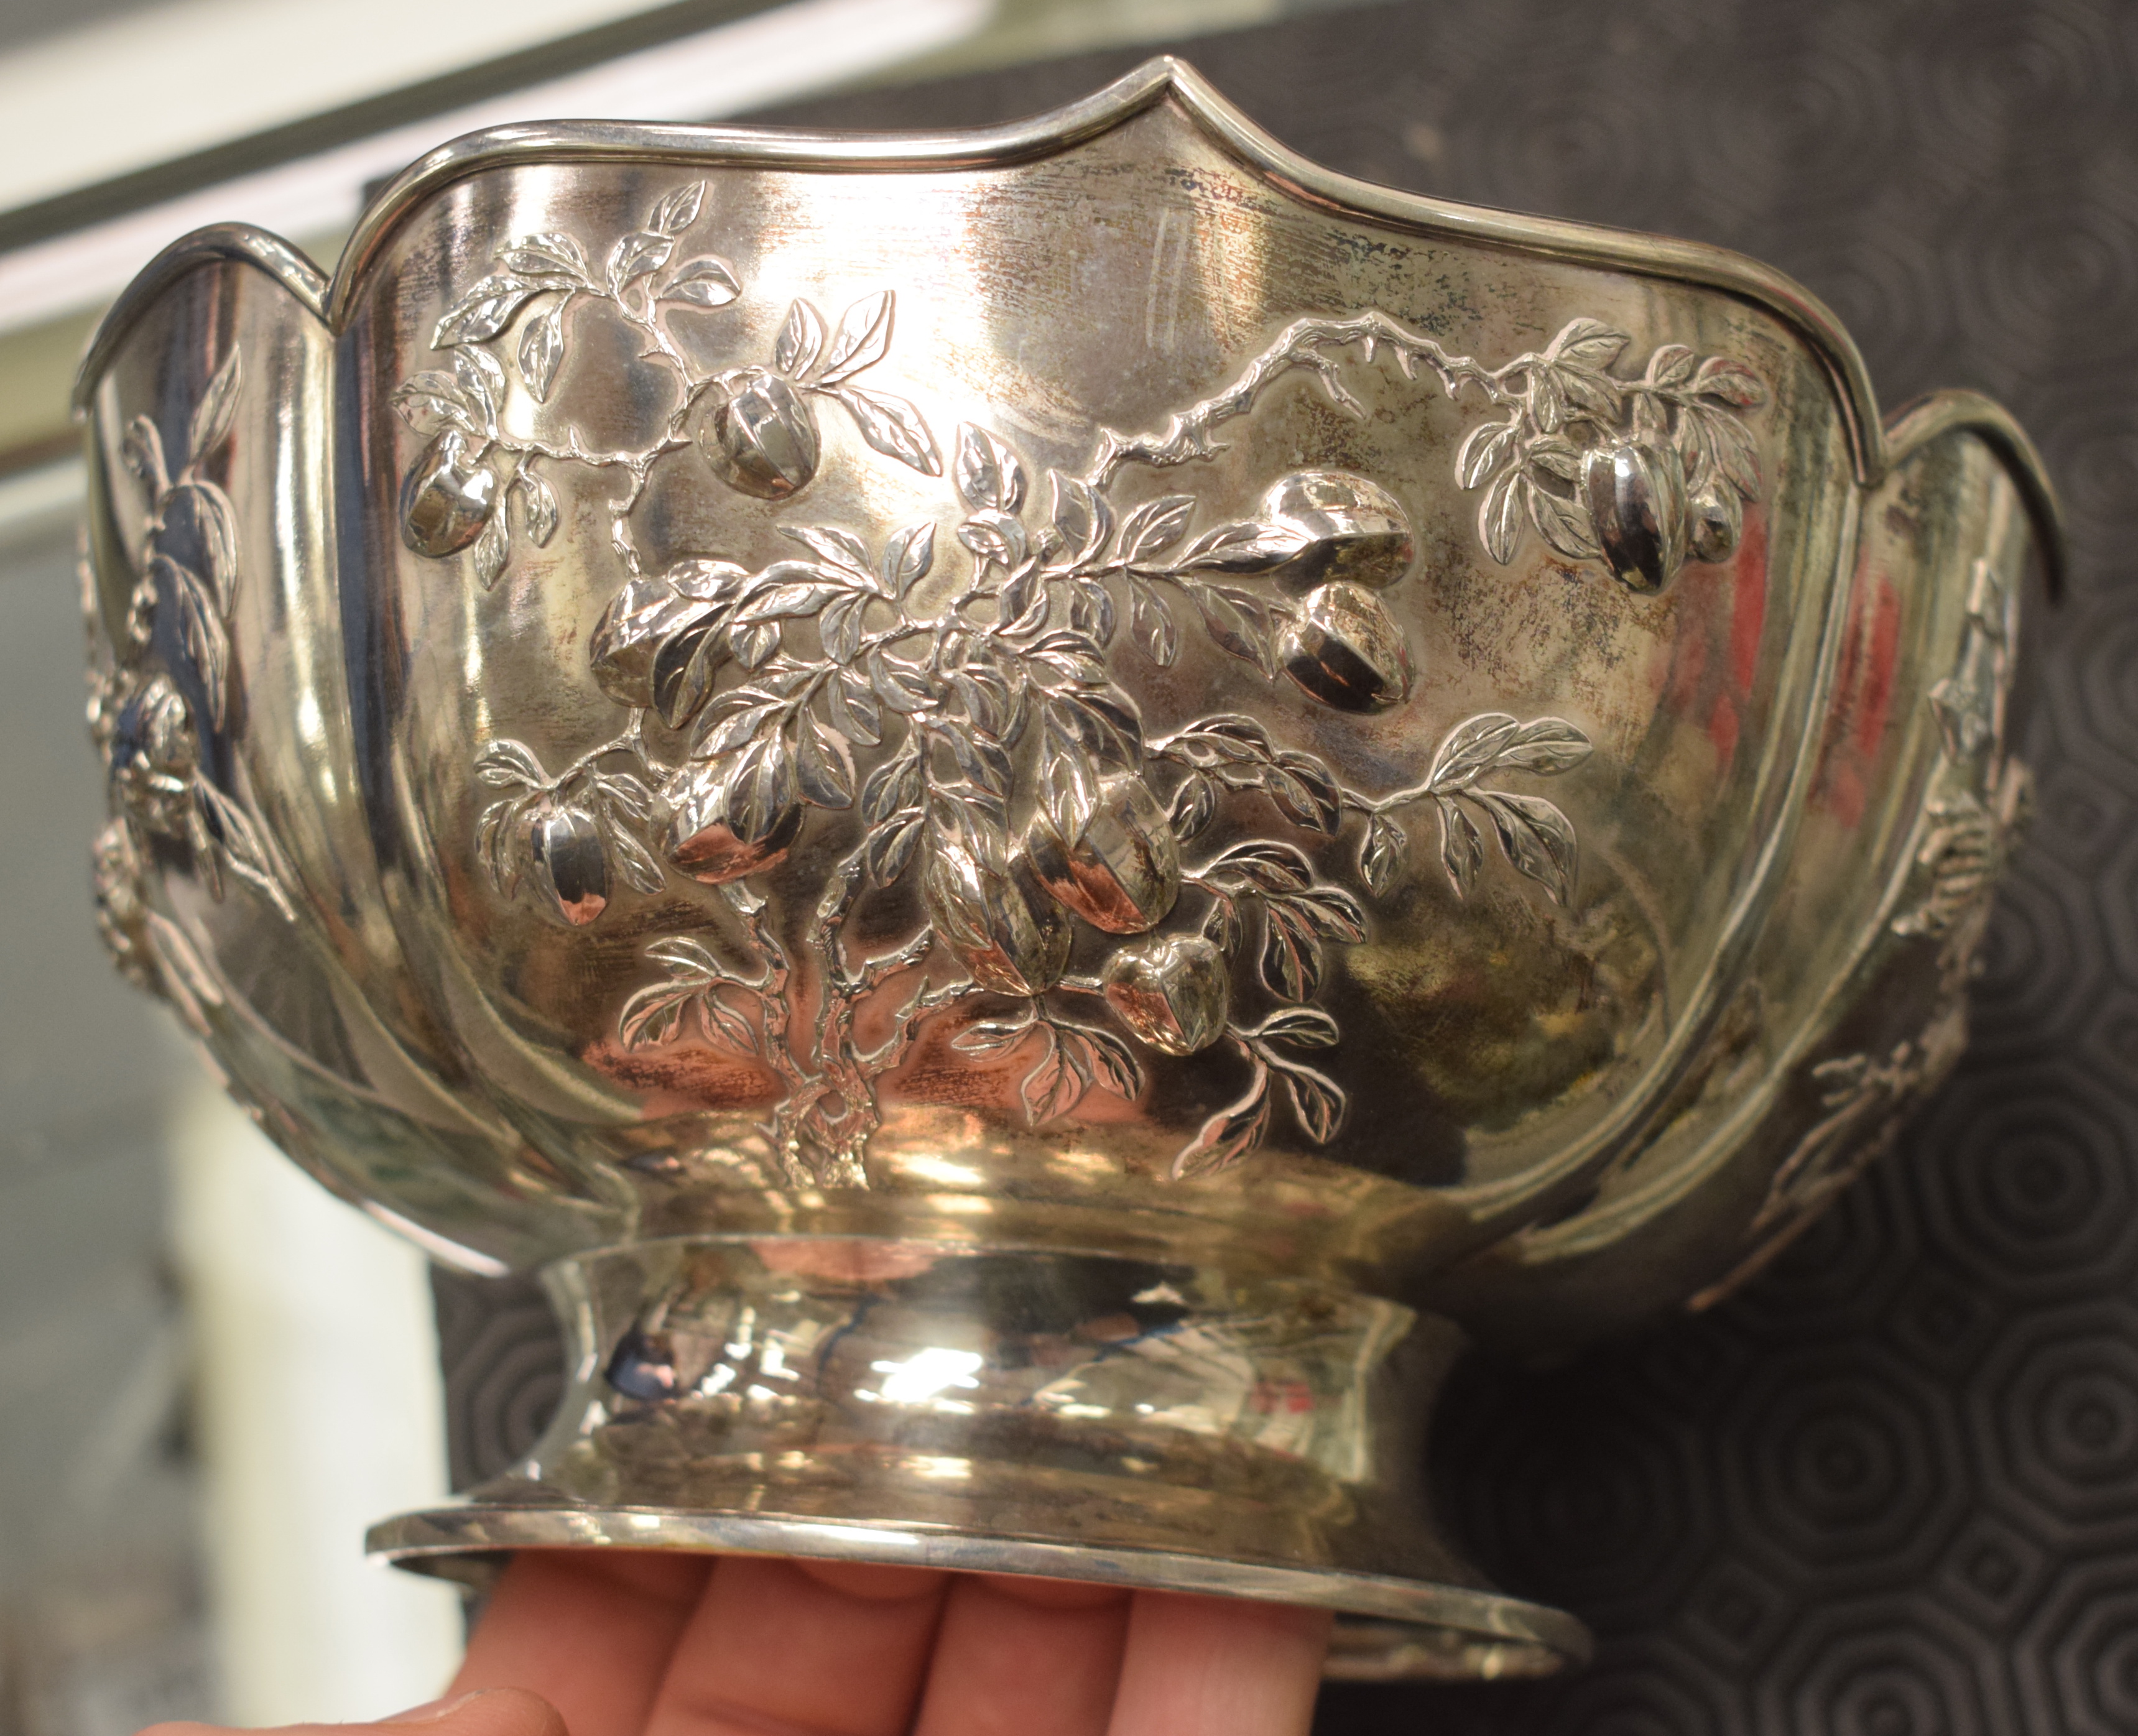 A LATE 19TH CENTURY CHINESE SCALLOPED SILVER BOWL by Zeewo, decorated with foliage and vines. 558 gr - Image 7 of 9